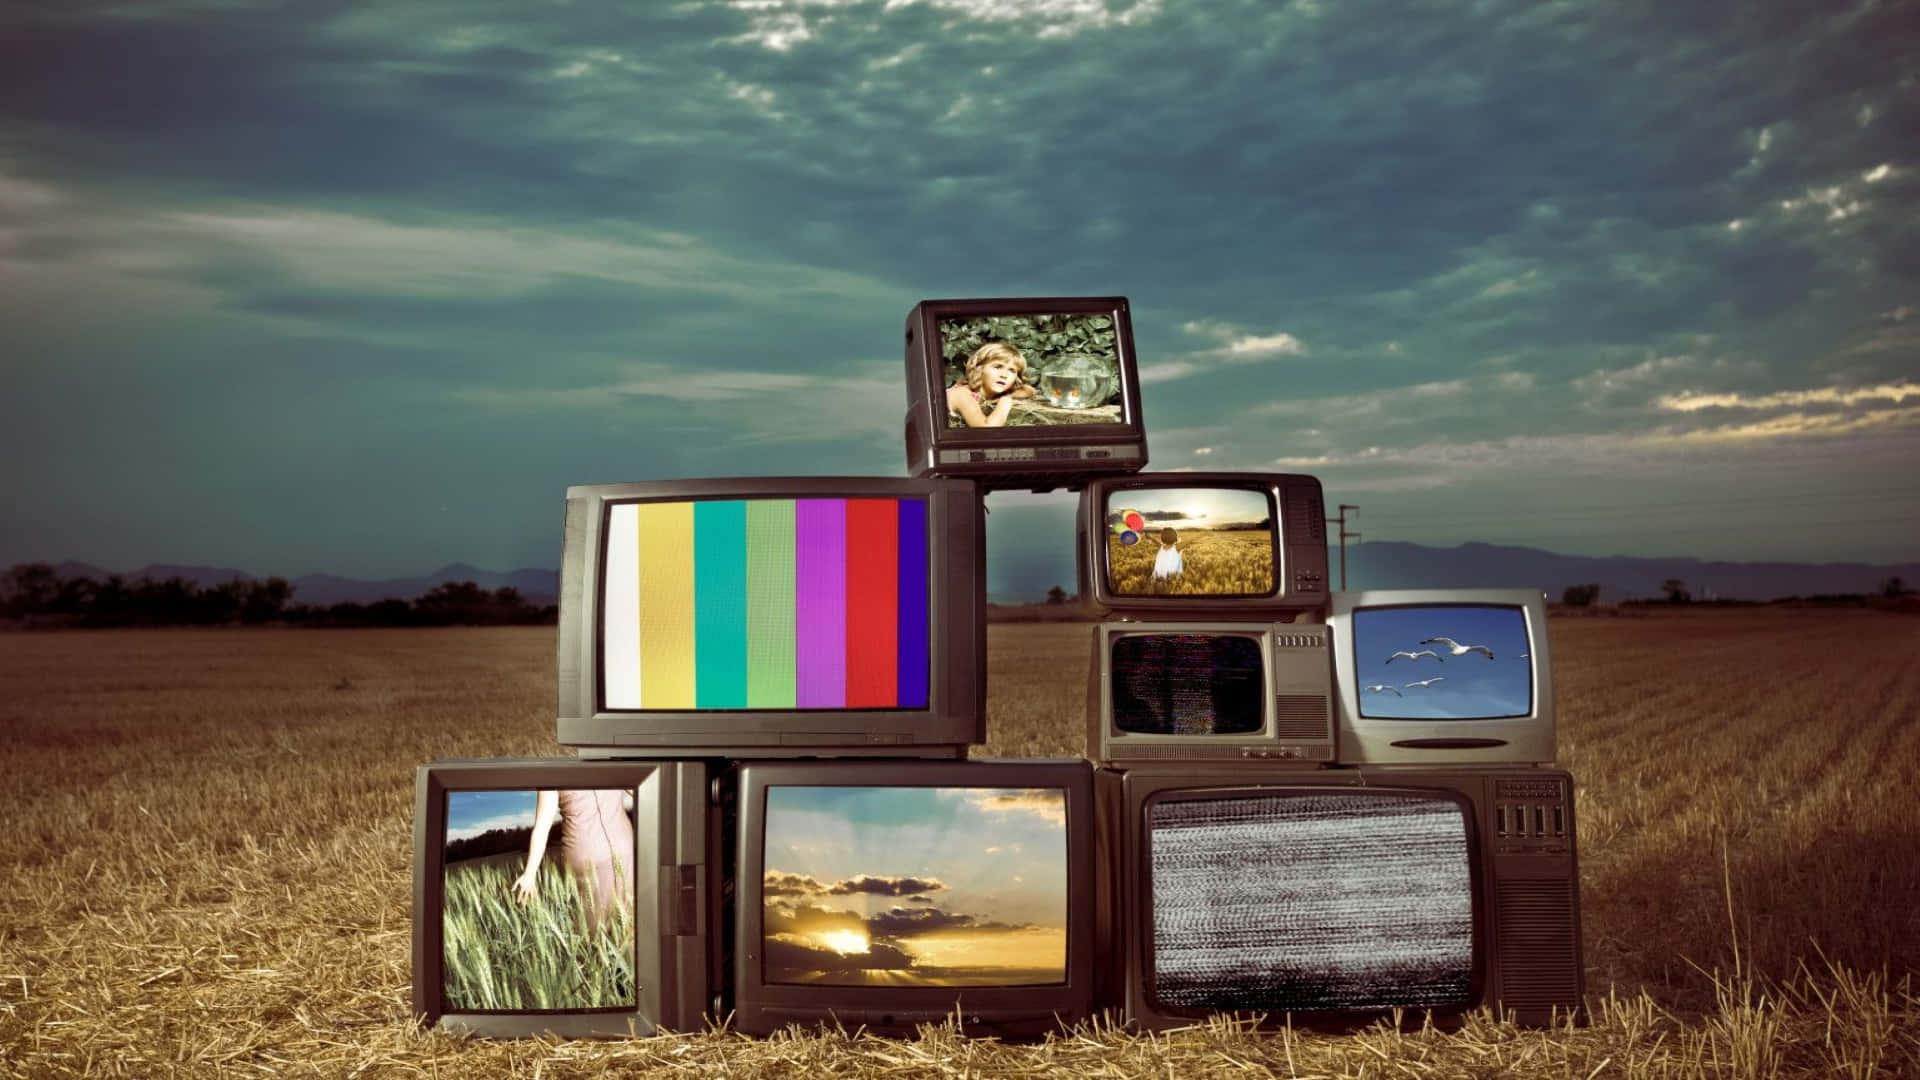 Download High Definition Television Wallpaper | Wallpapers.com